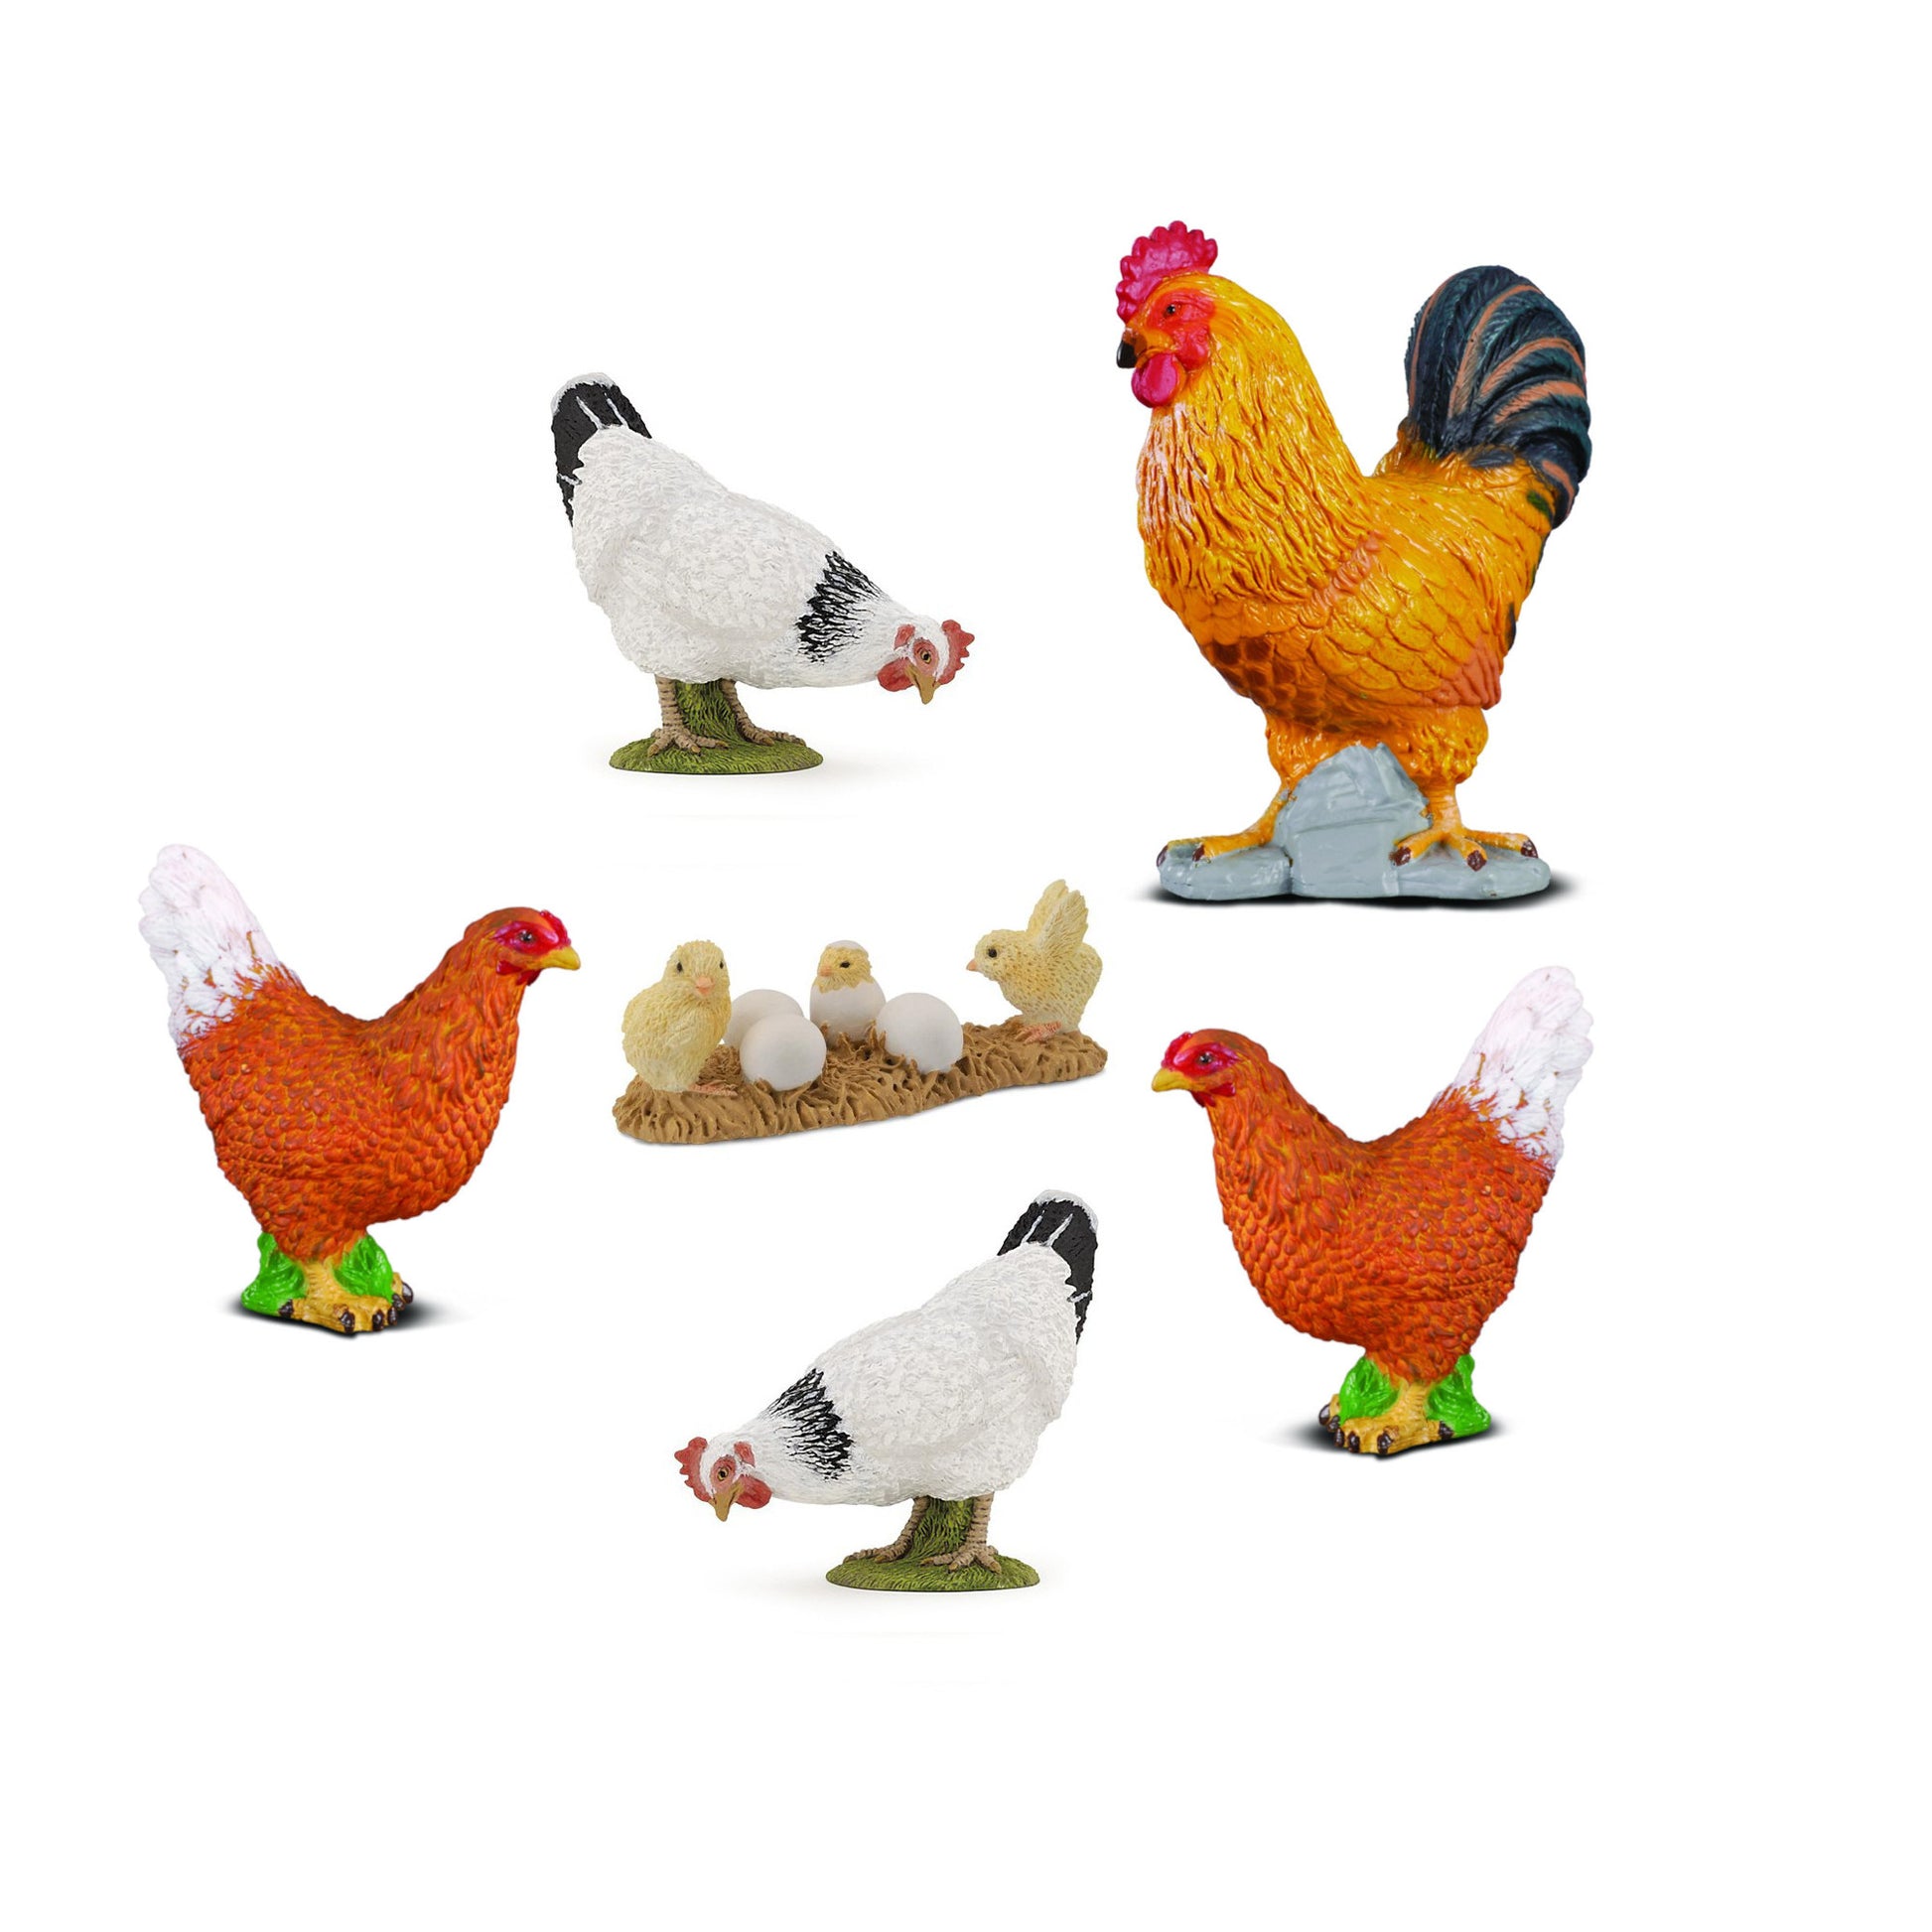 Hens and Rooster set